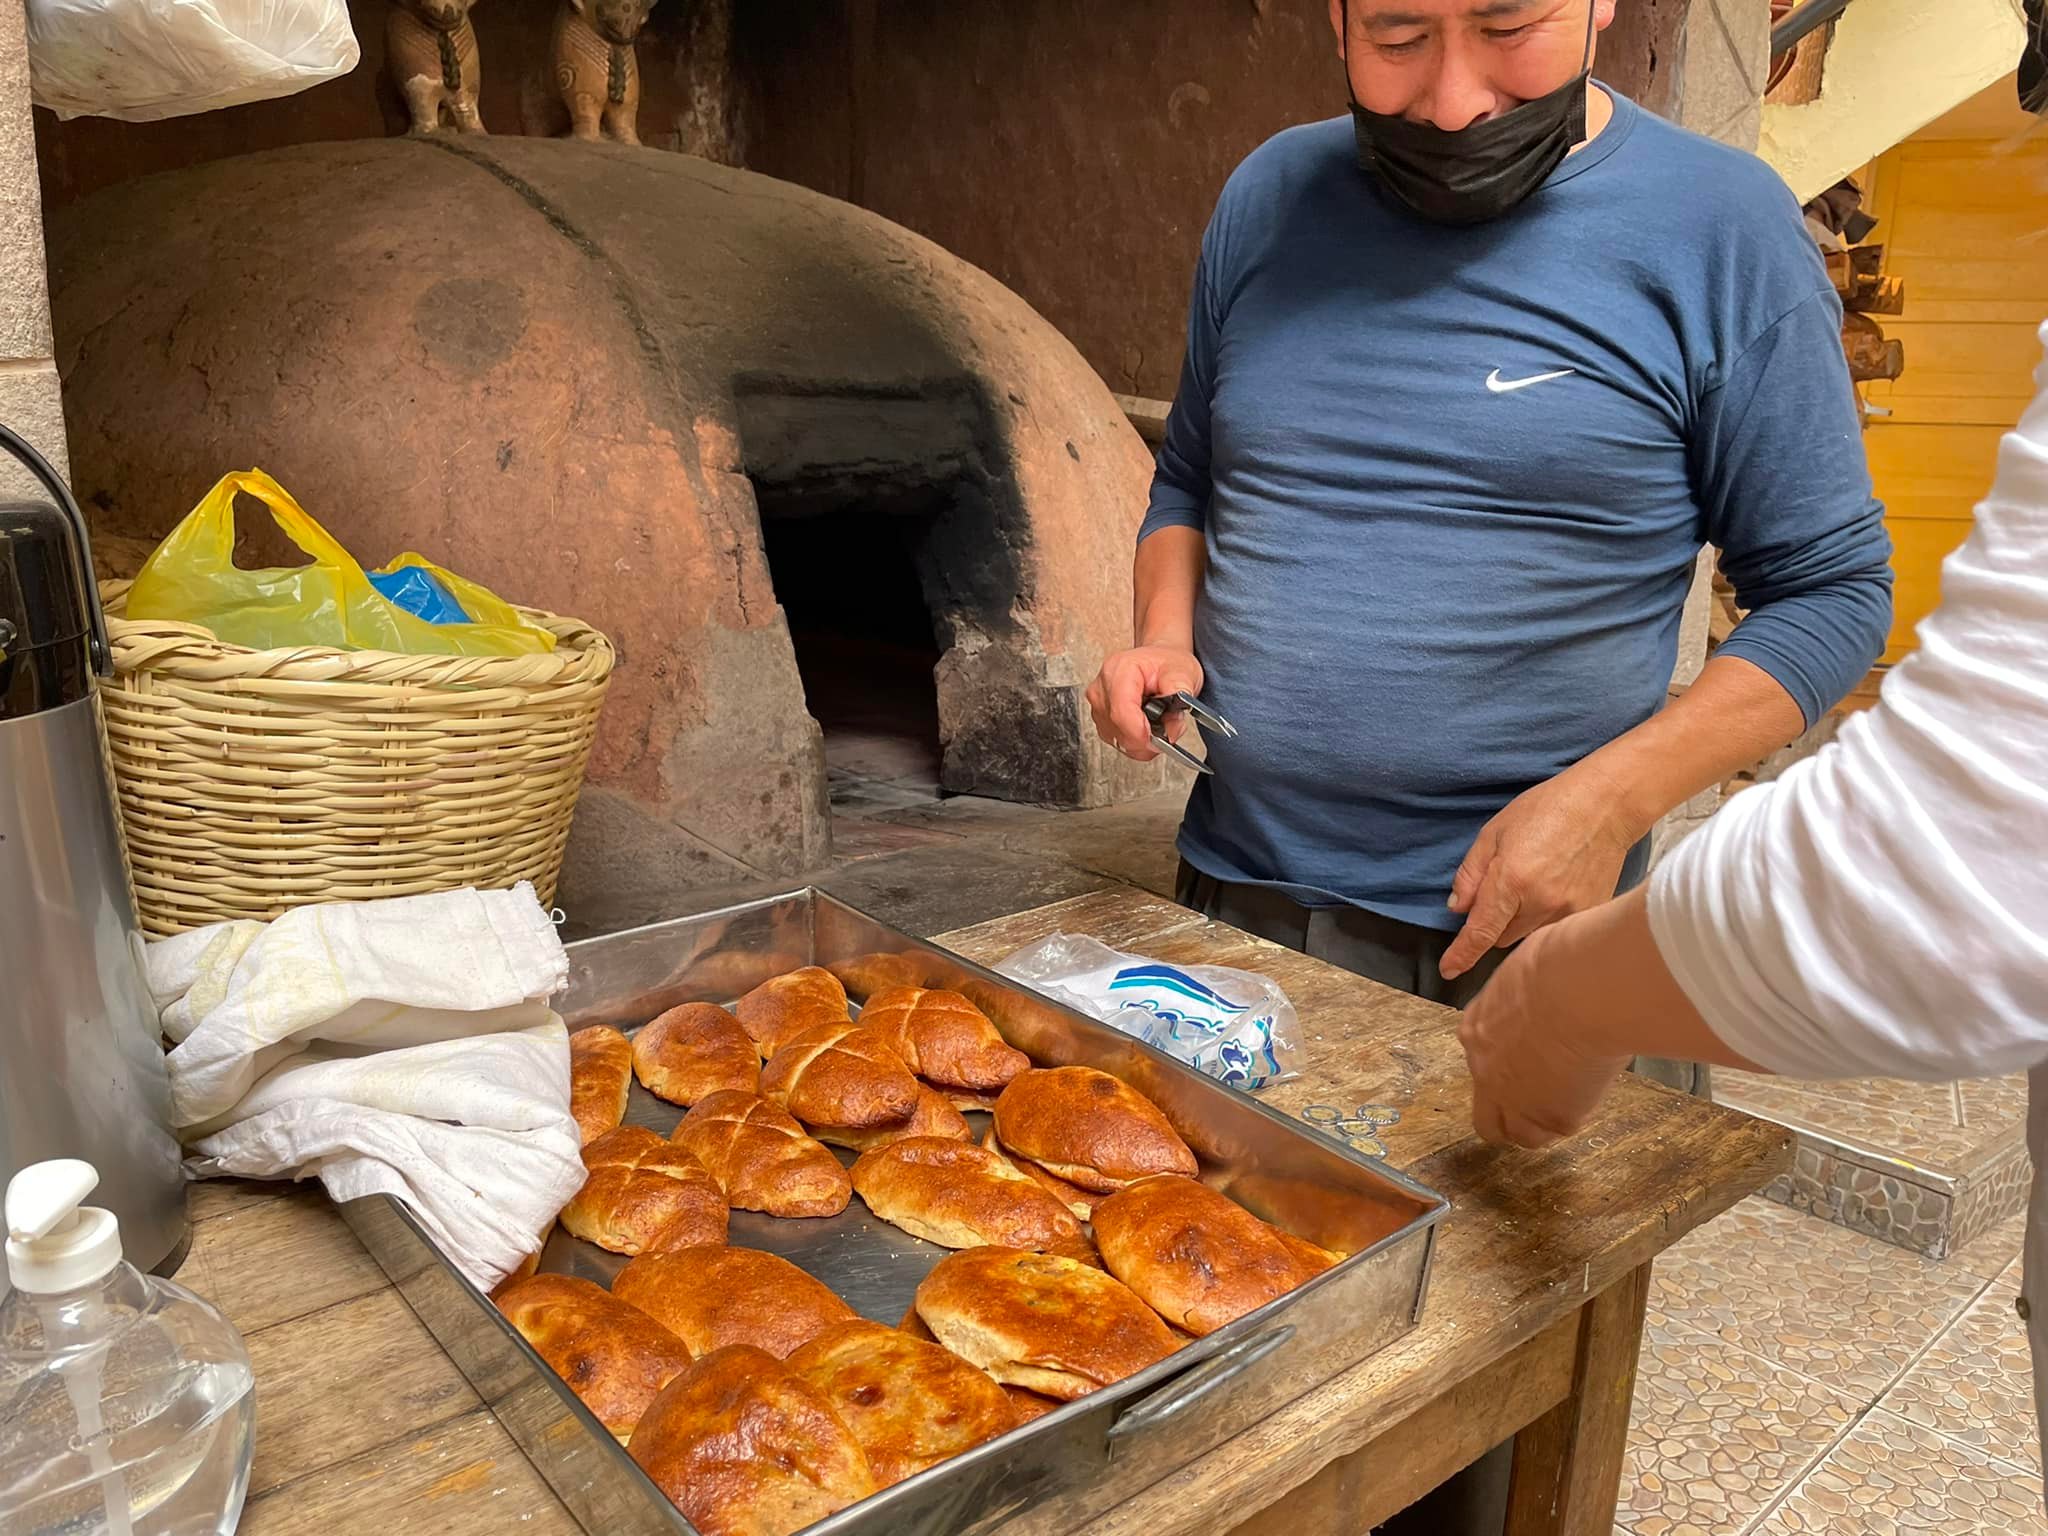 Pictures of Peru 3/4: Image a Peruvian man in front of a tray of empanadas